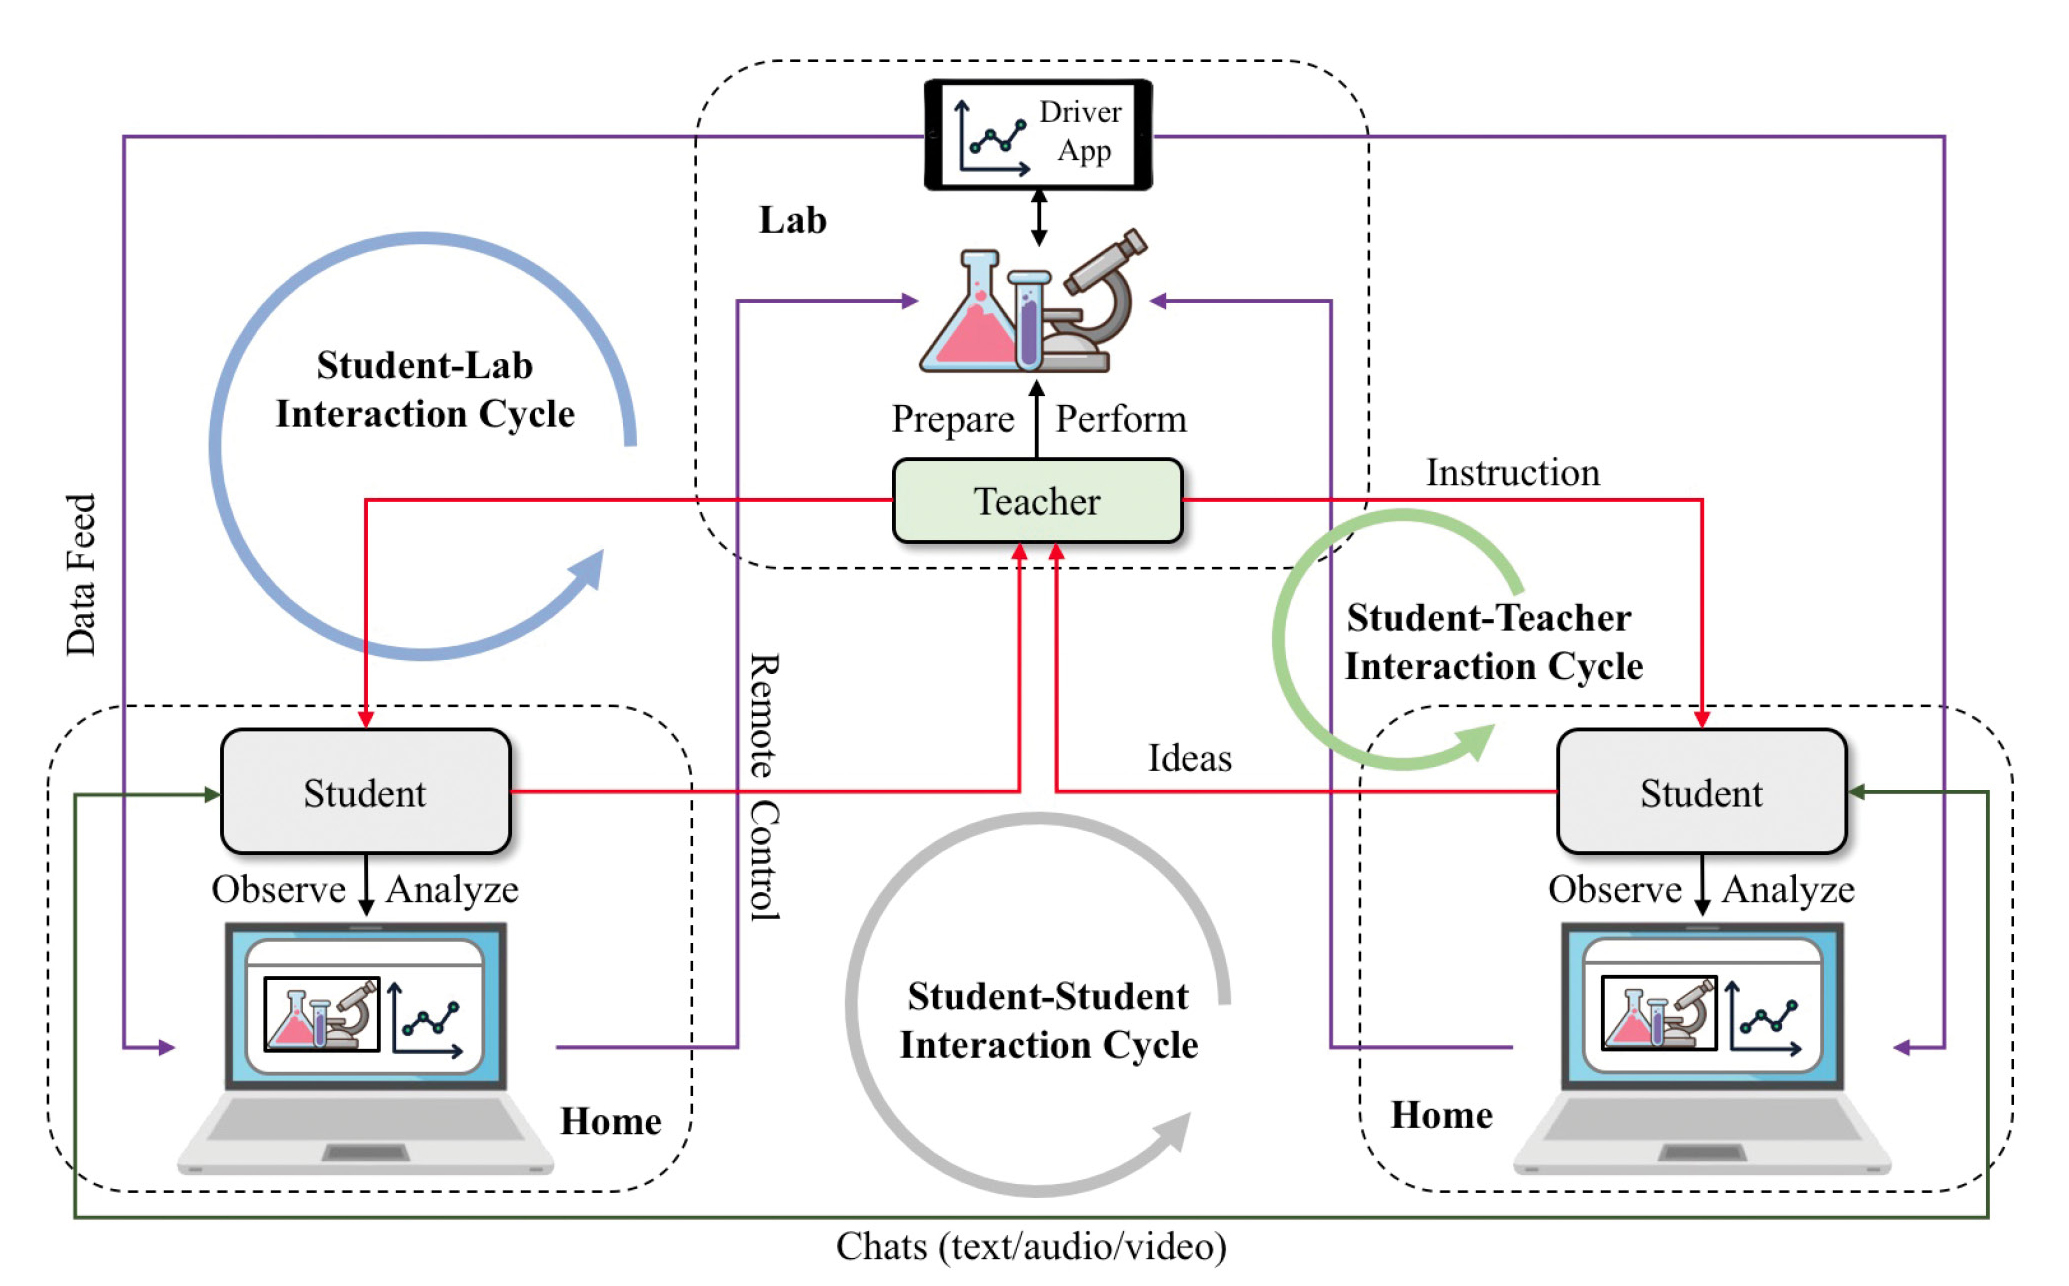 The remote inquiry instructional model comprises three interaction cycles: 1) the student-teacher interaction cycle, where the teacher delivers inquiry instructions to the students, and the students present experiment ideas and designs to the teacher; 2) the student-lab interaction cycle, where the students both receive the data feed from the remote labs (prepared and performed by the teacher) and can request remote control of the lab equipment; 3) the student-student interaction cycle, where the students o